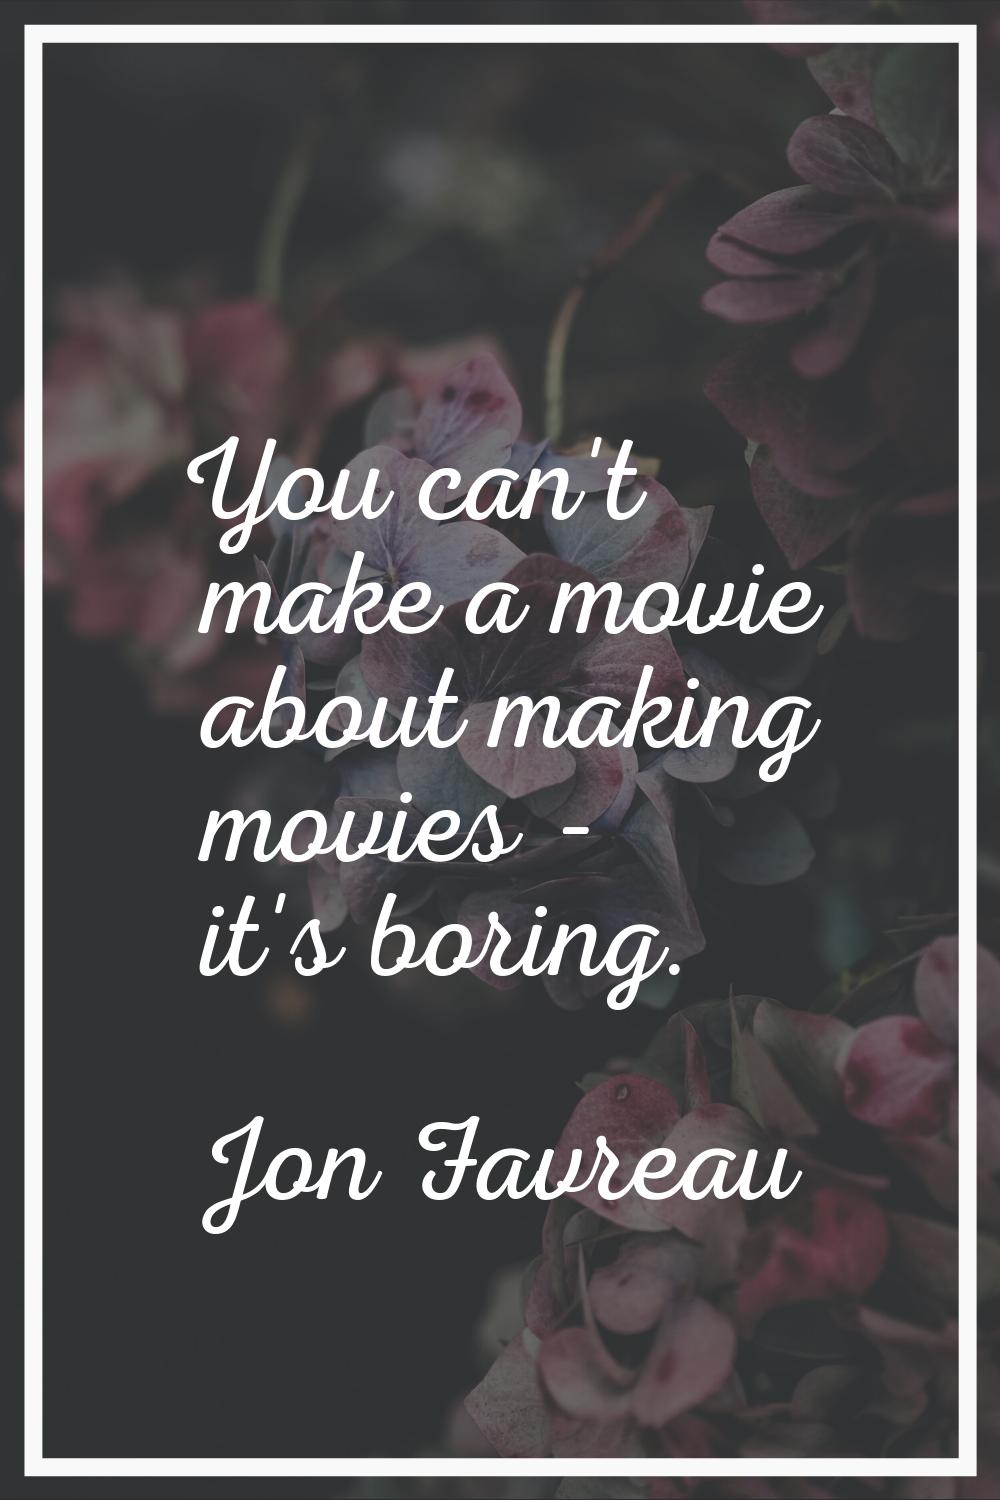 You can't make a movie about making movies - it's boring.